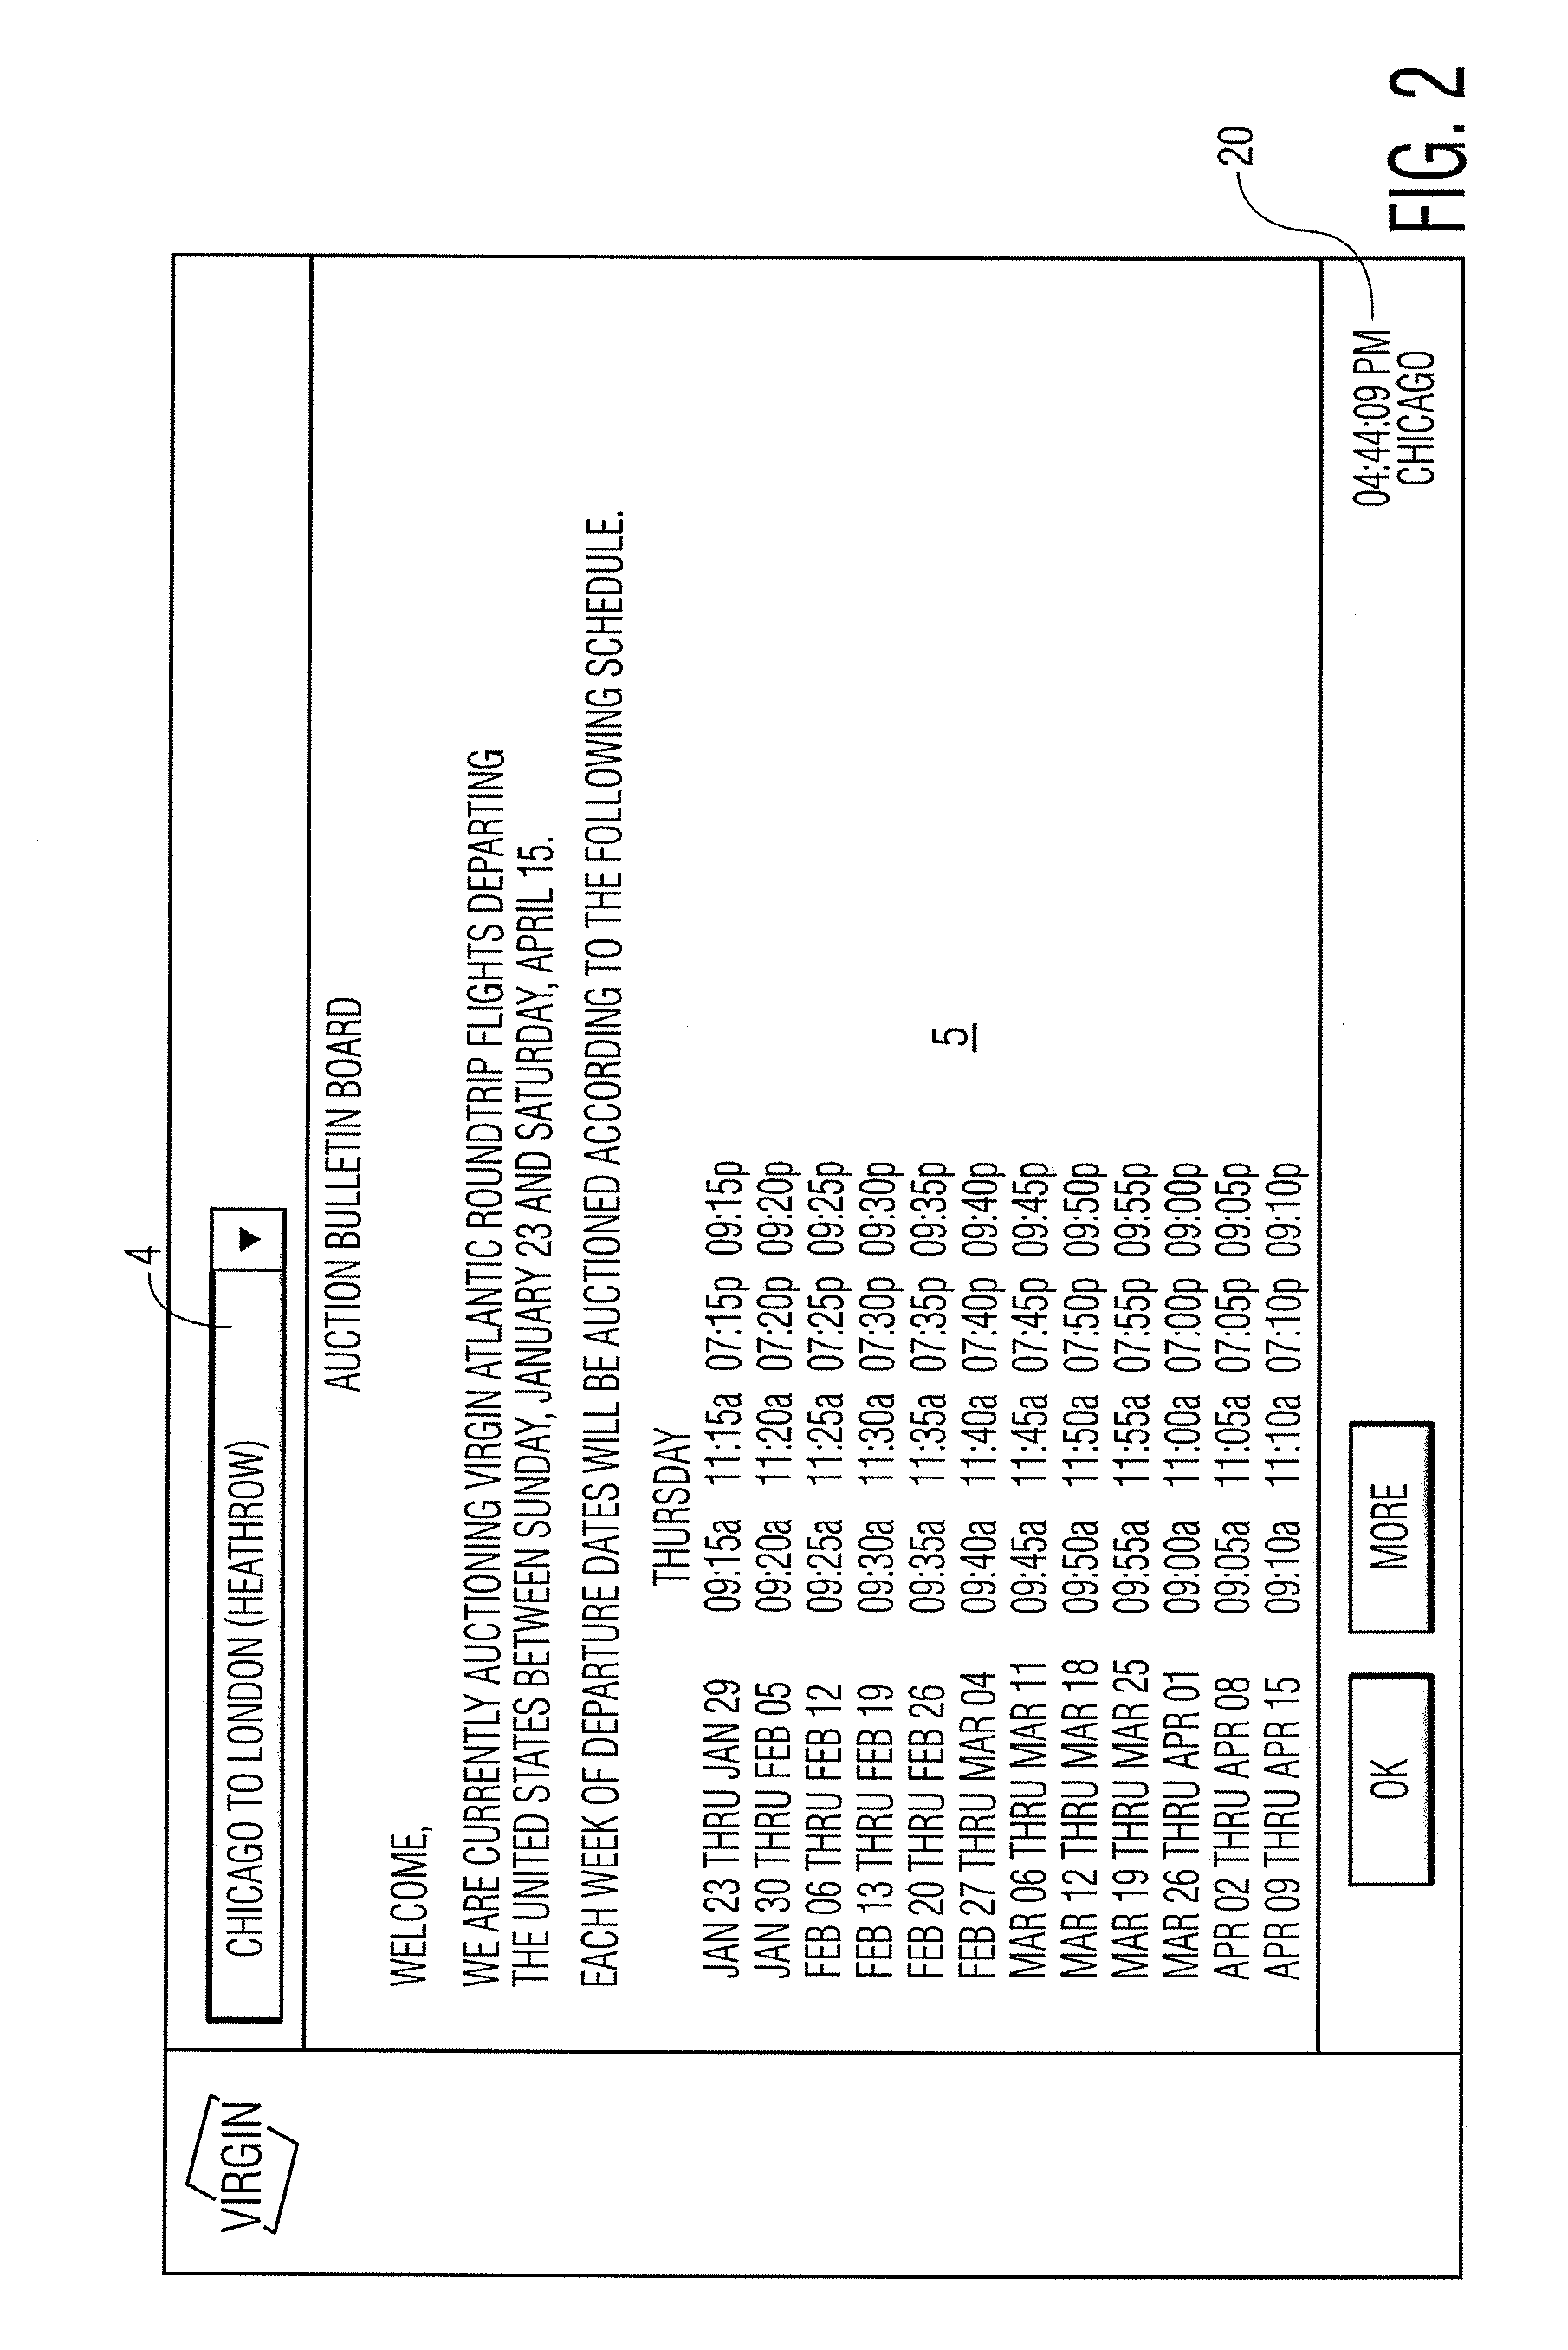 Real time electronic commerce telecommunication system and method